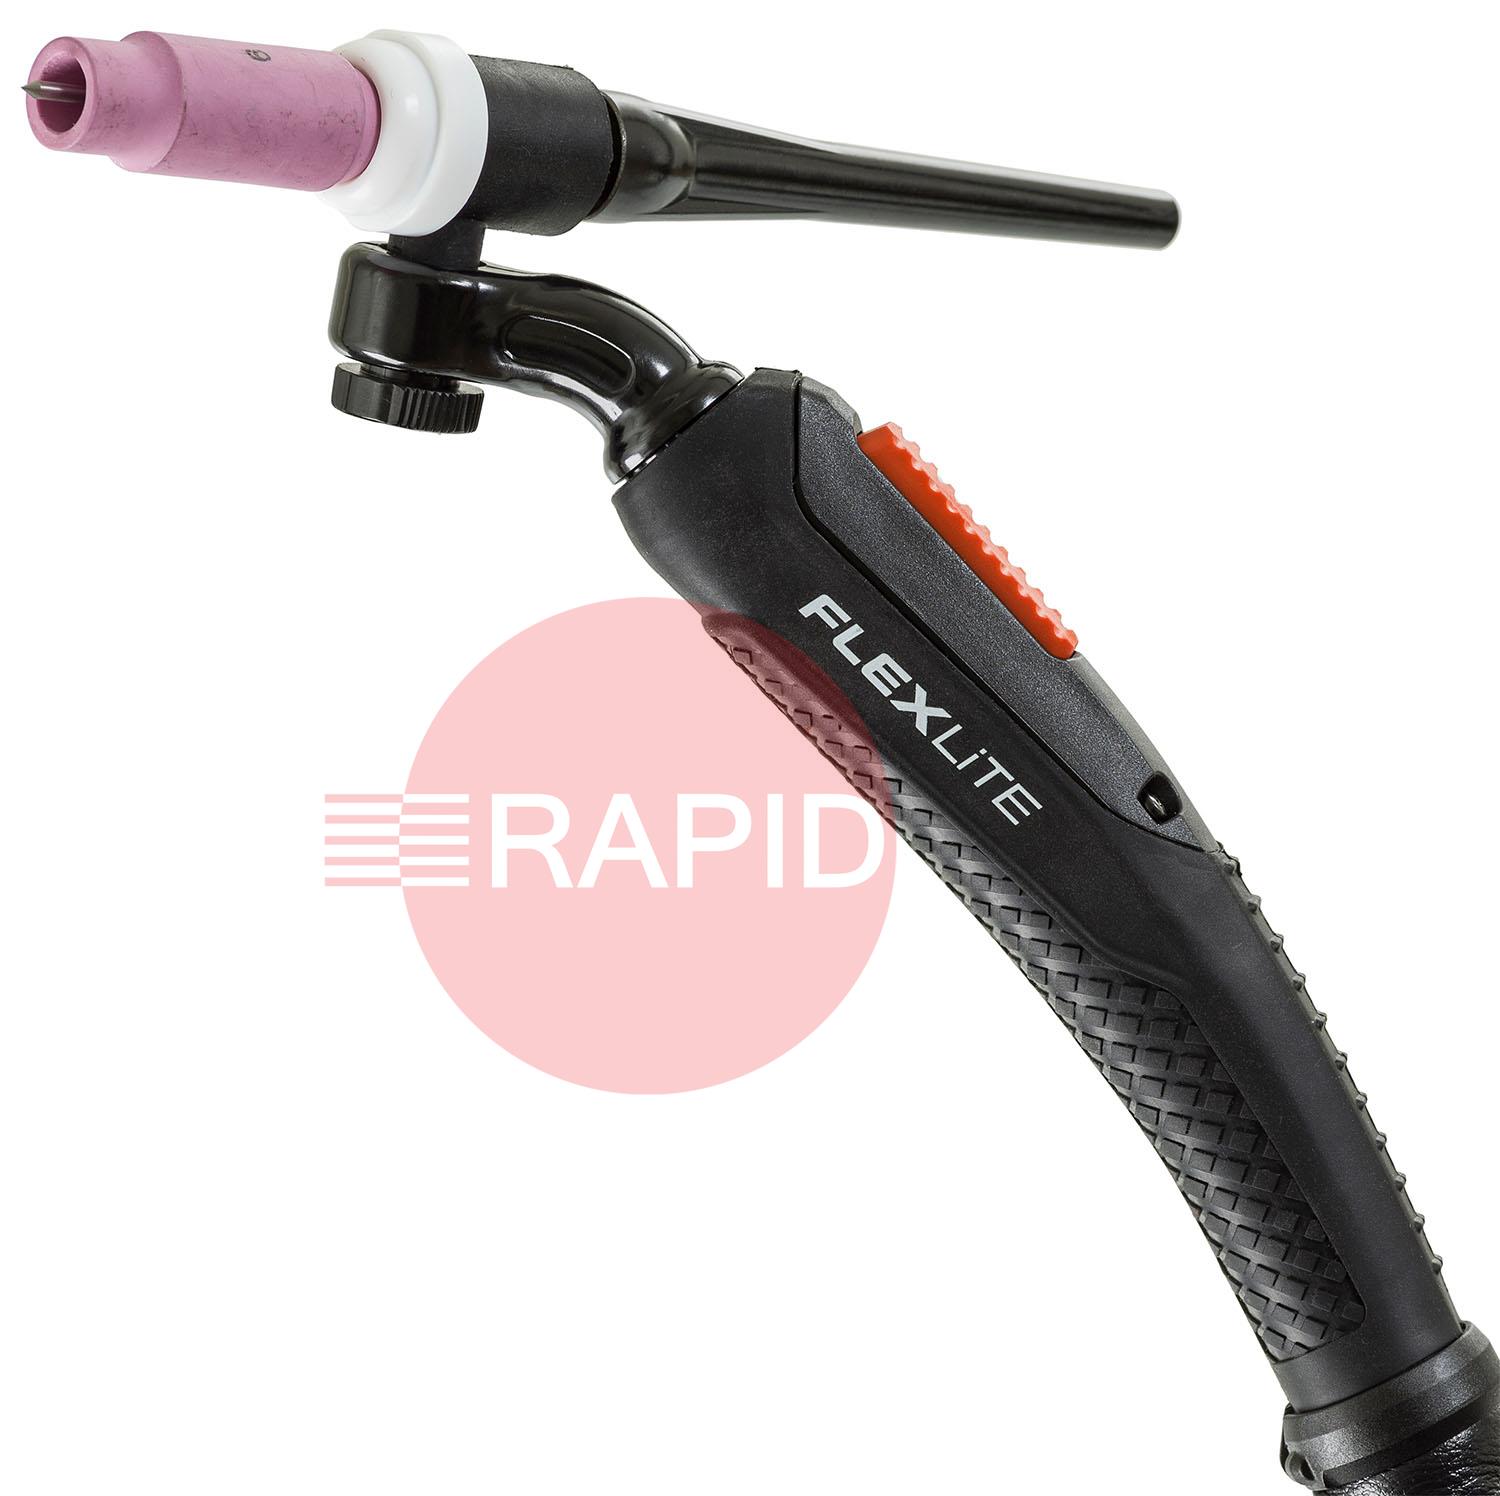 TX225GFL  Kemppi Flexlite TX K5 225GFL Air Cooled 220 Amp TIG Torch, with Rotate & Lock Neck (Without Consumables) 7 Pin